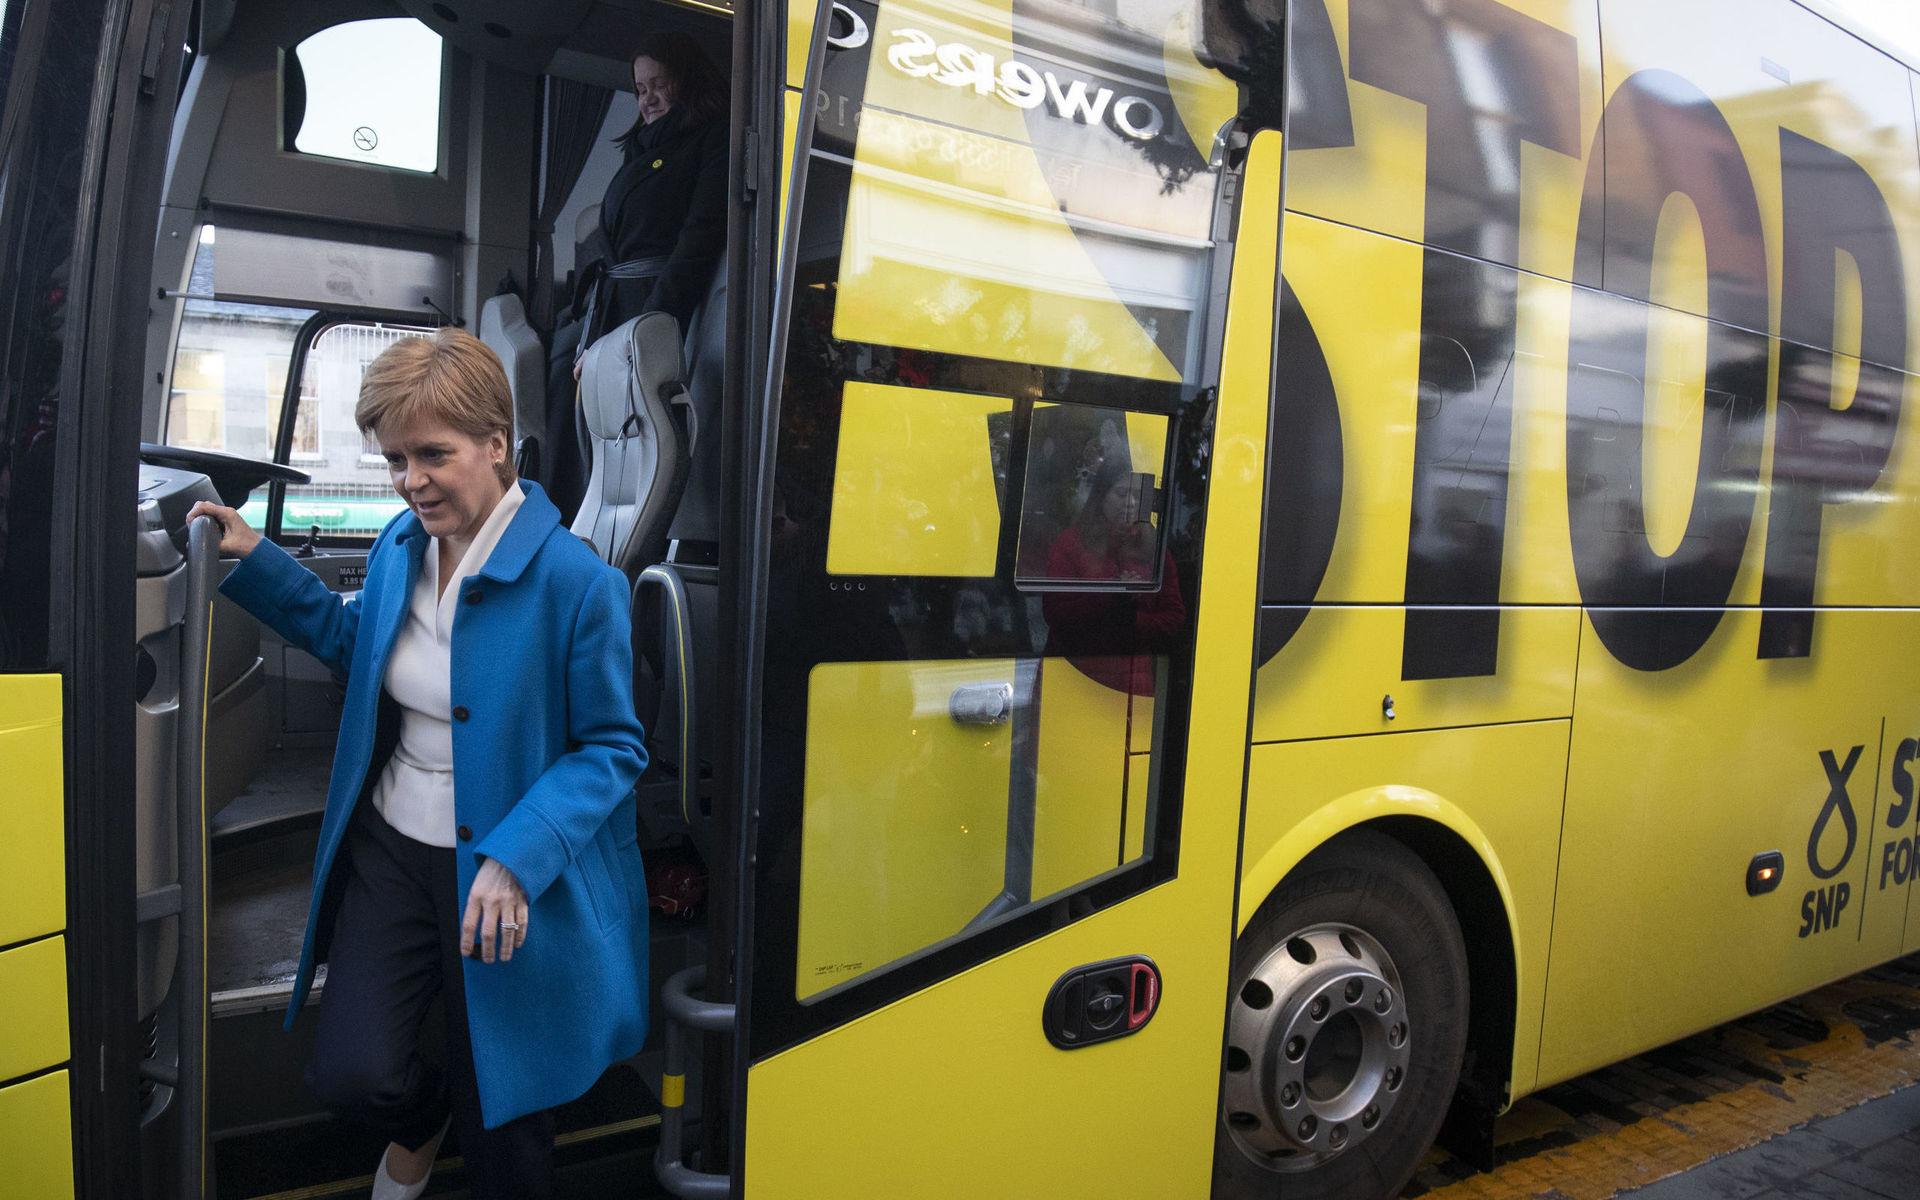 Scottish National Party (SNP) leader Nicola Sturgeon arrives for an election stopover on the General Election campaign trail in Lanark, Scotland, Monday Dec. 9, 2019.  The UK goes to the polls in a General Election on Dec. 12. (Jane Barlow/PA via AP)  LRC804